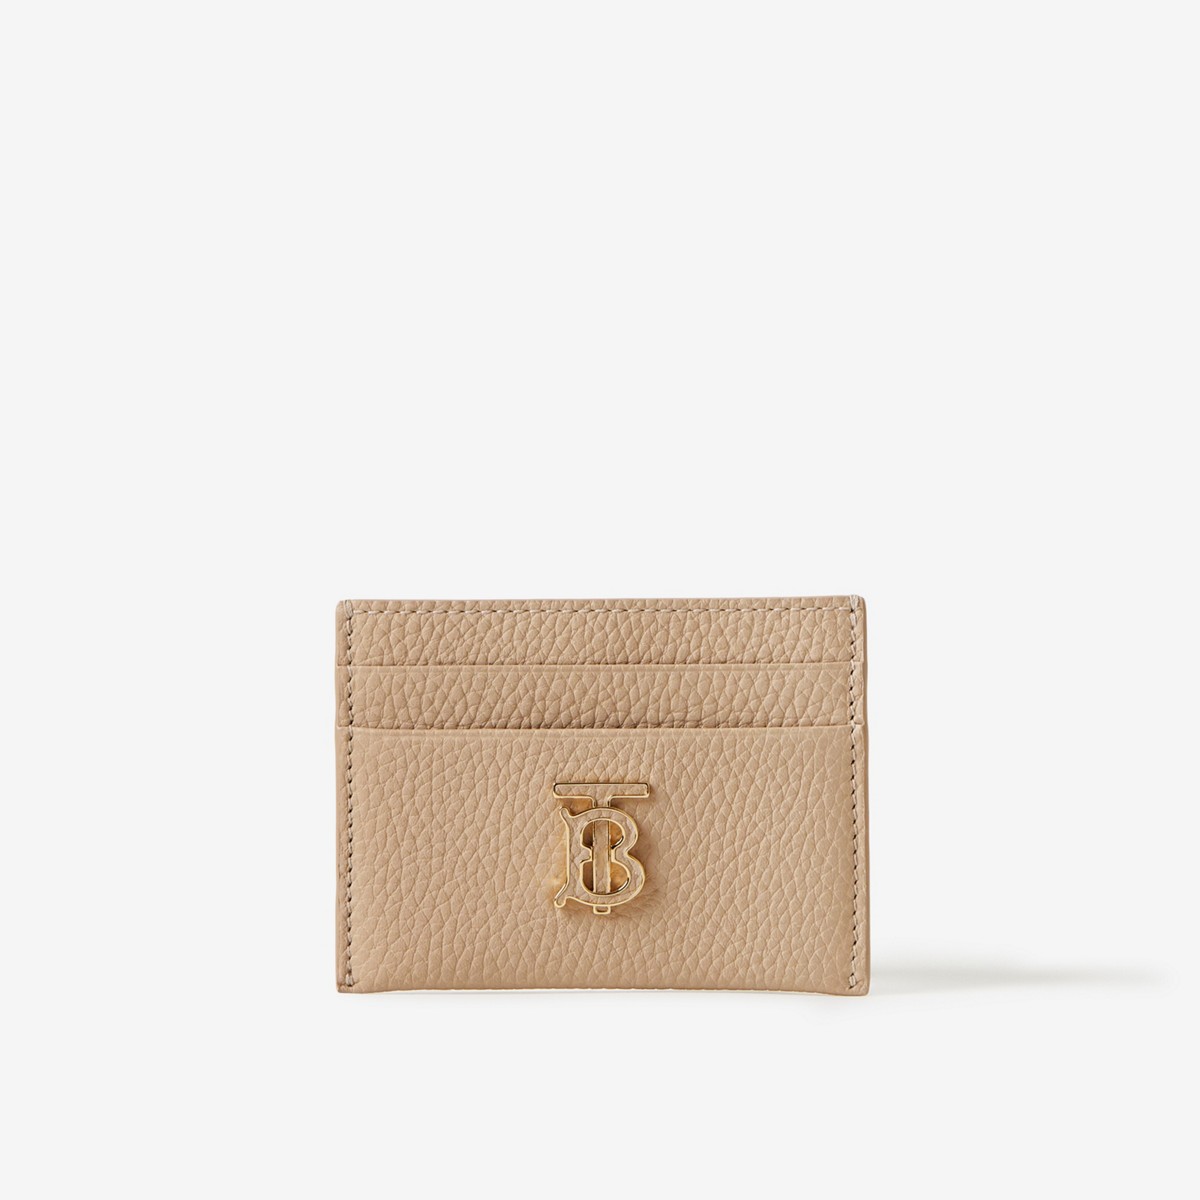 Burberry Grainy Leather Tb Card Case In Oat Beige